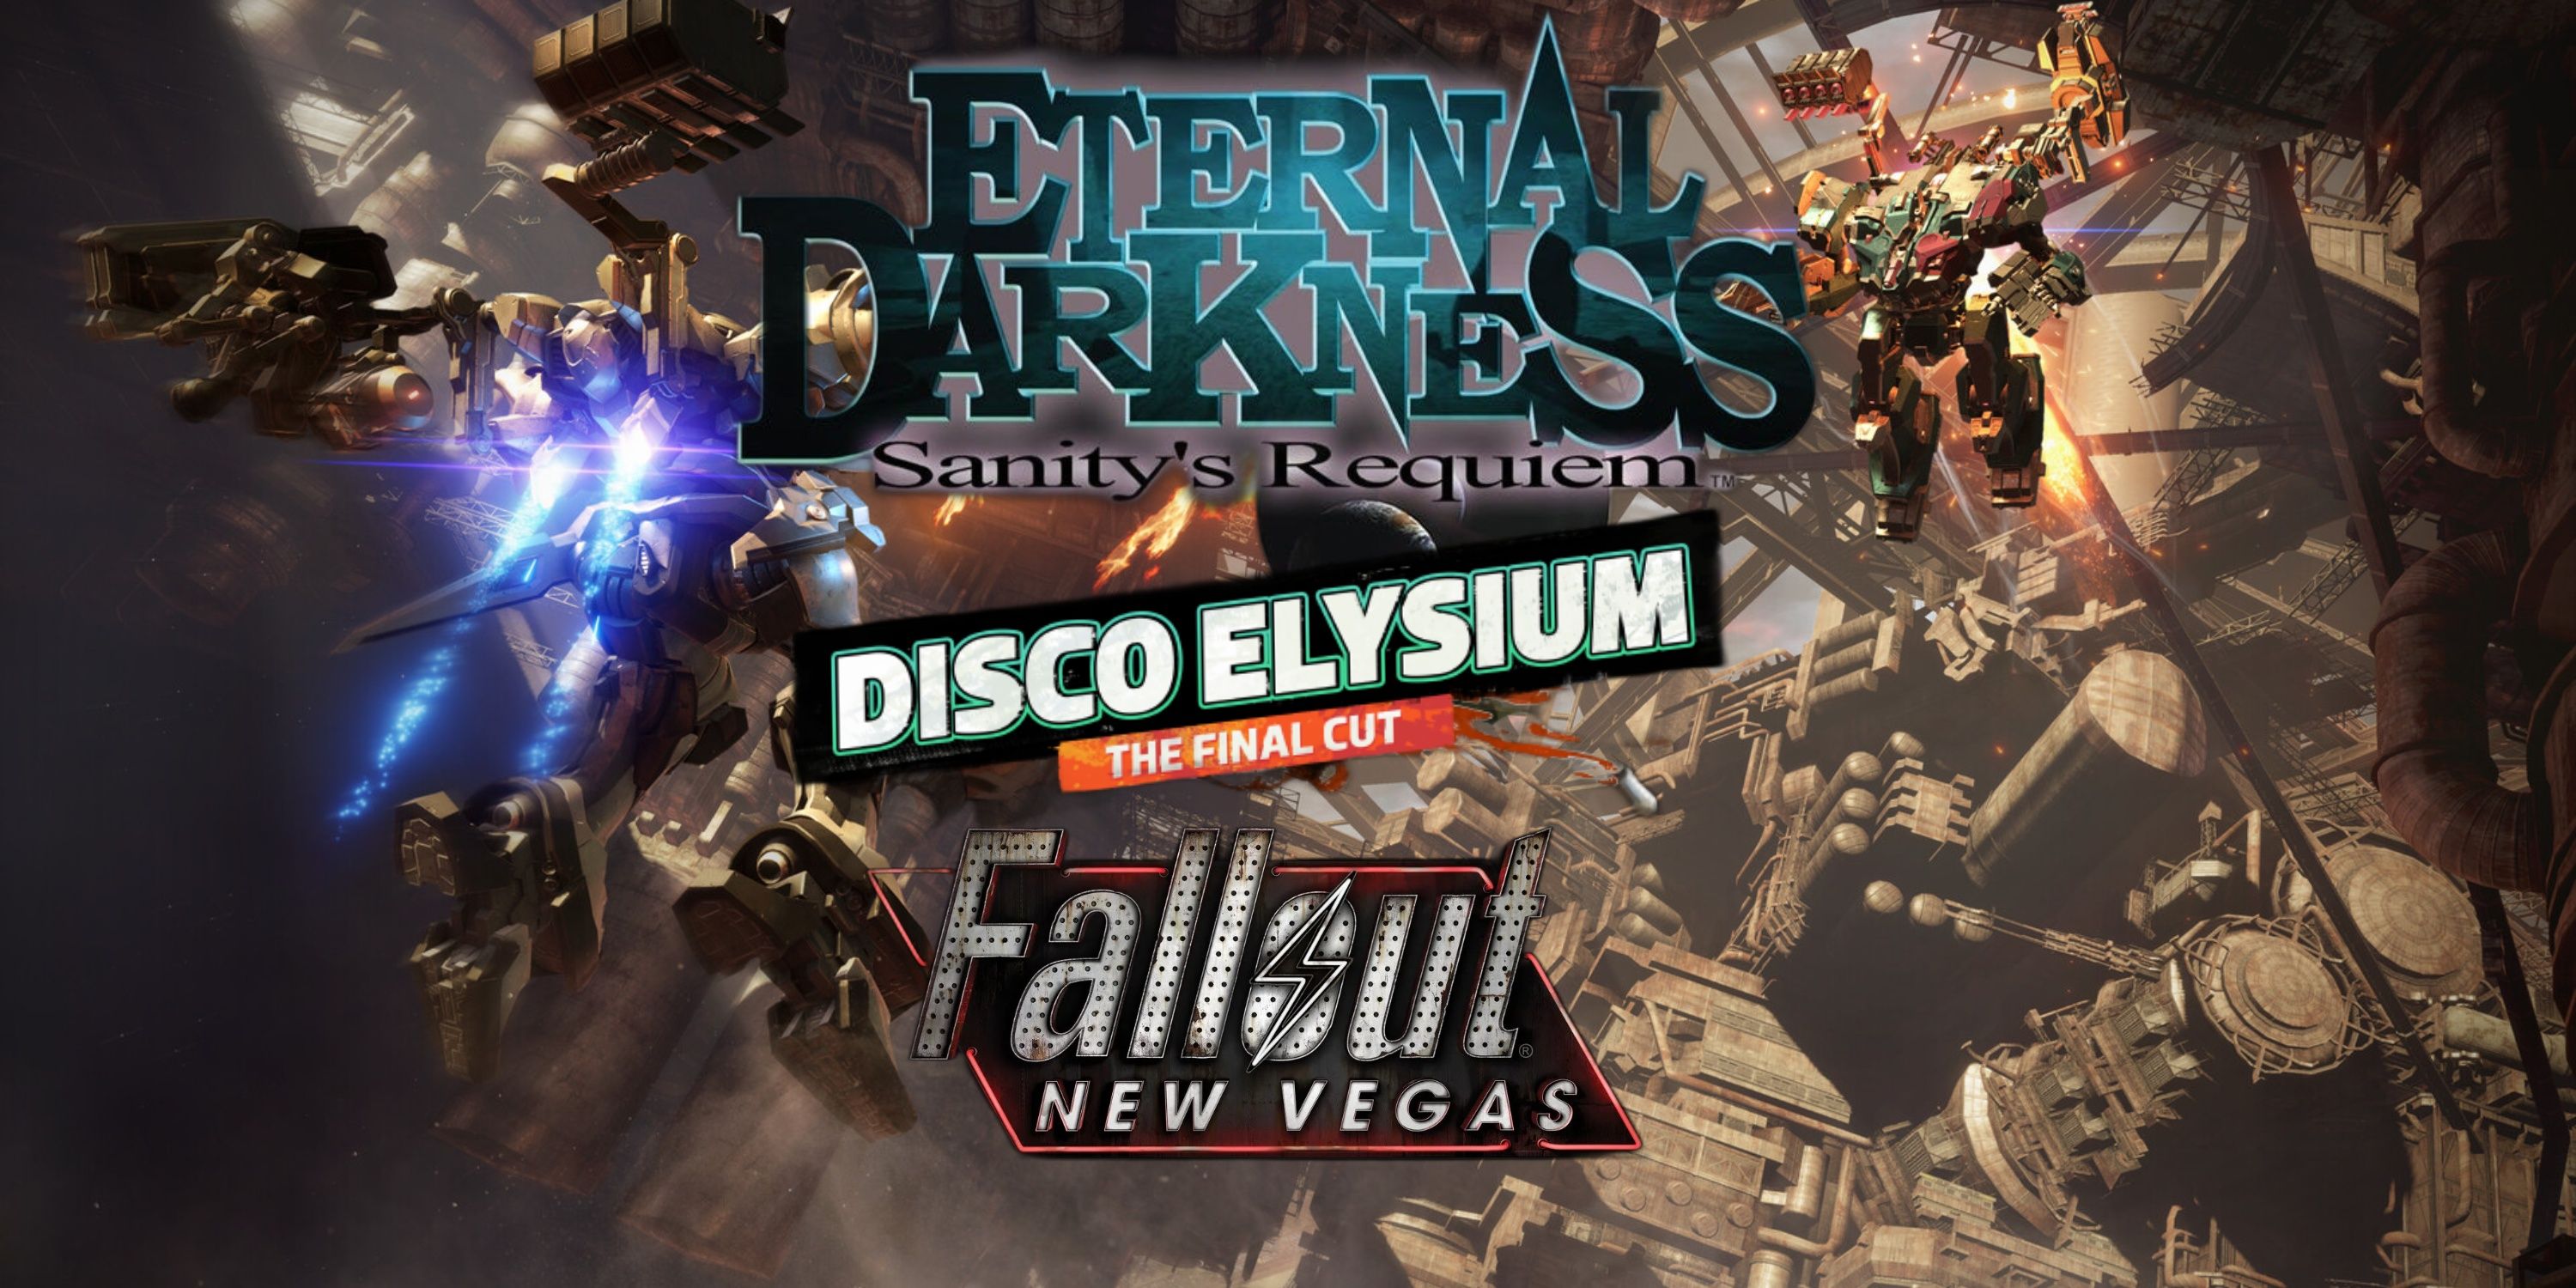 Games You Should Play Multiple Times (Featured Image) - Armored Core 6 + Disco Elysium + Fallout: New Vegas + Eternal Darkness